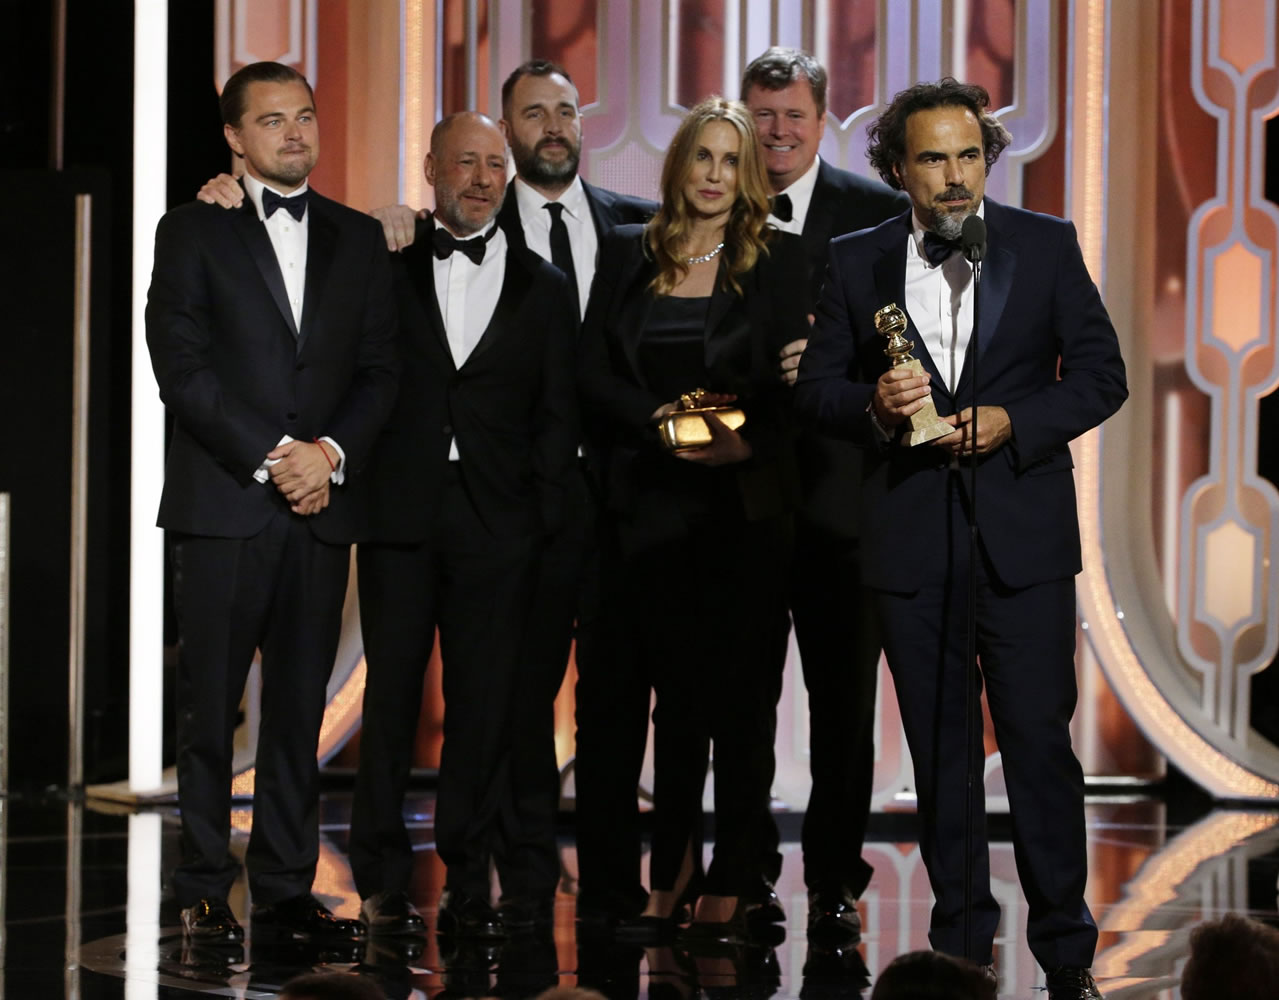 In this image released by NBC, Leonardo DiCaprio, left, looks on with the crew of "The Revenant," as director Alejandro G. Inarritu, right, accepts the award for best motion picture drama during the 73rd Annual Golden Globe Awards at the Beverly Hilton Hotel in Beverly Hills, Calif., on Sunday, Jan. 10, 2016.